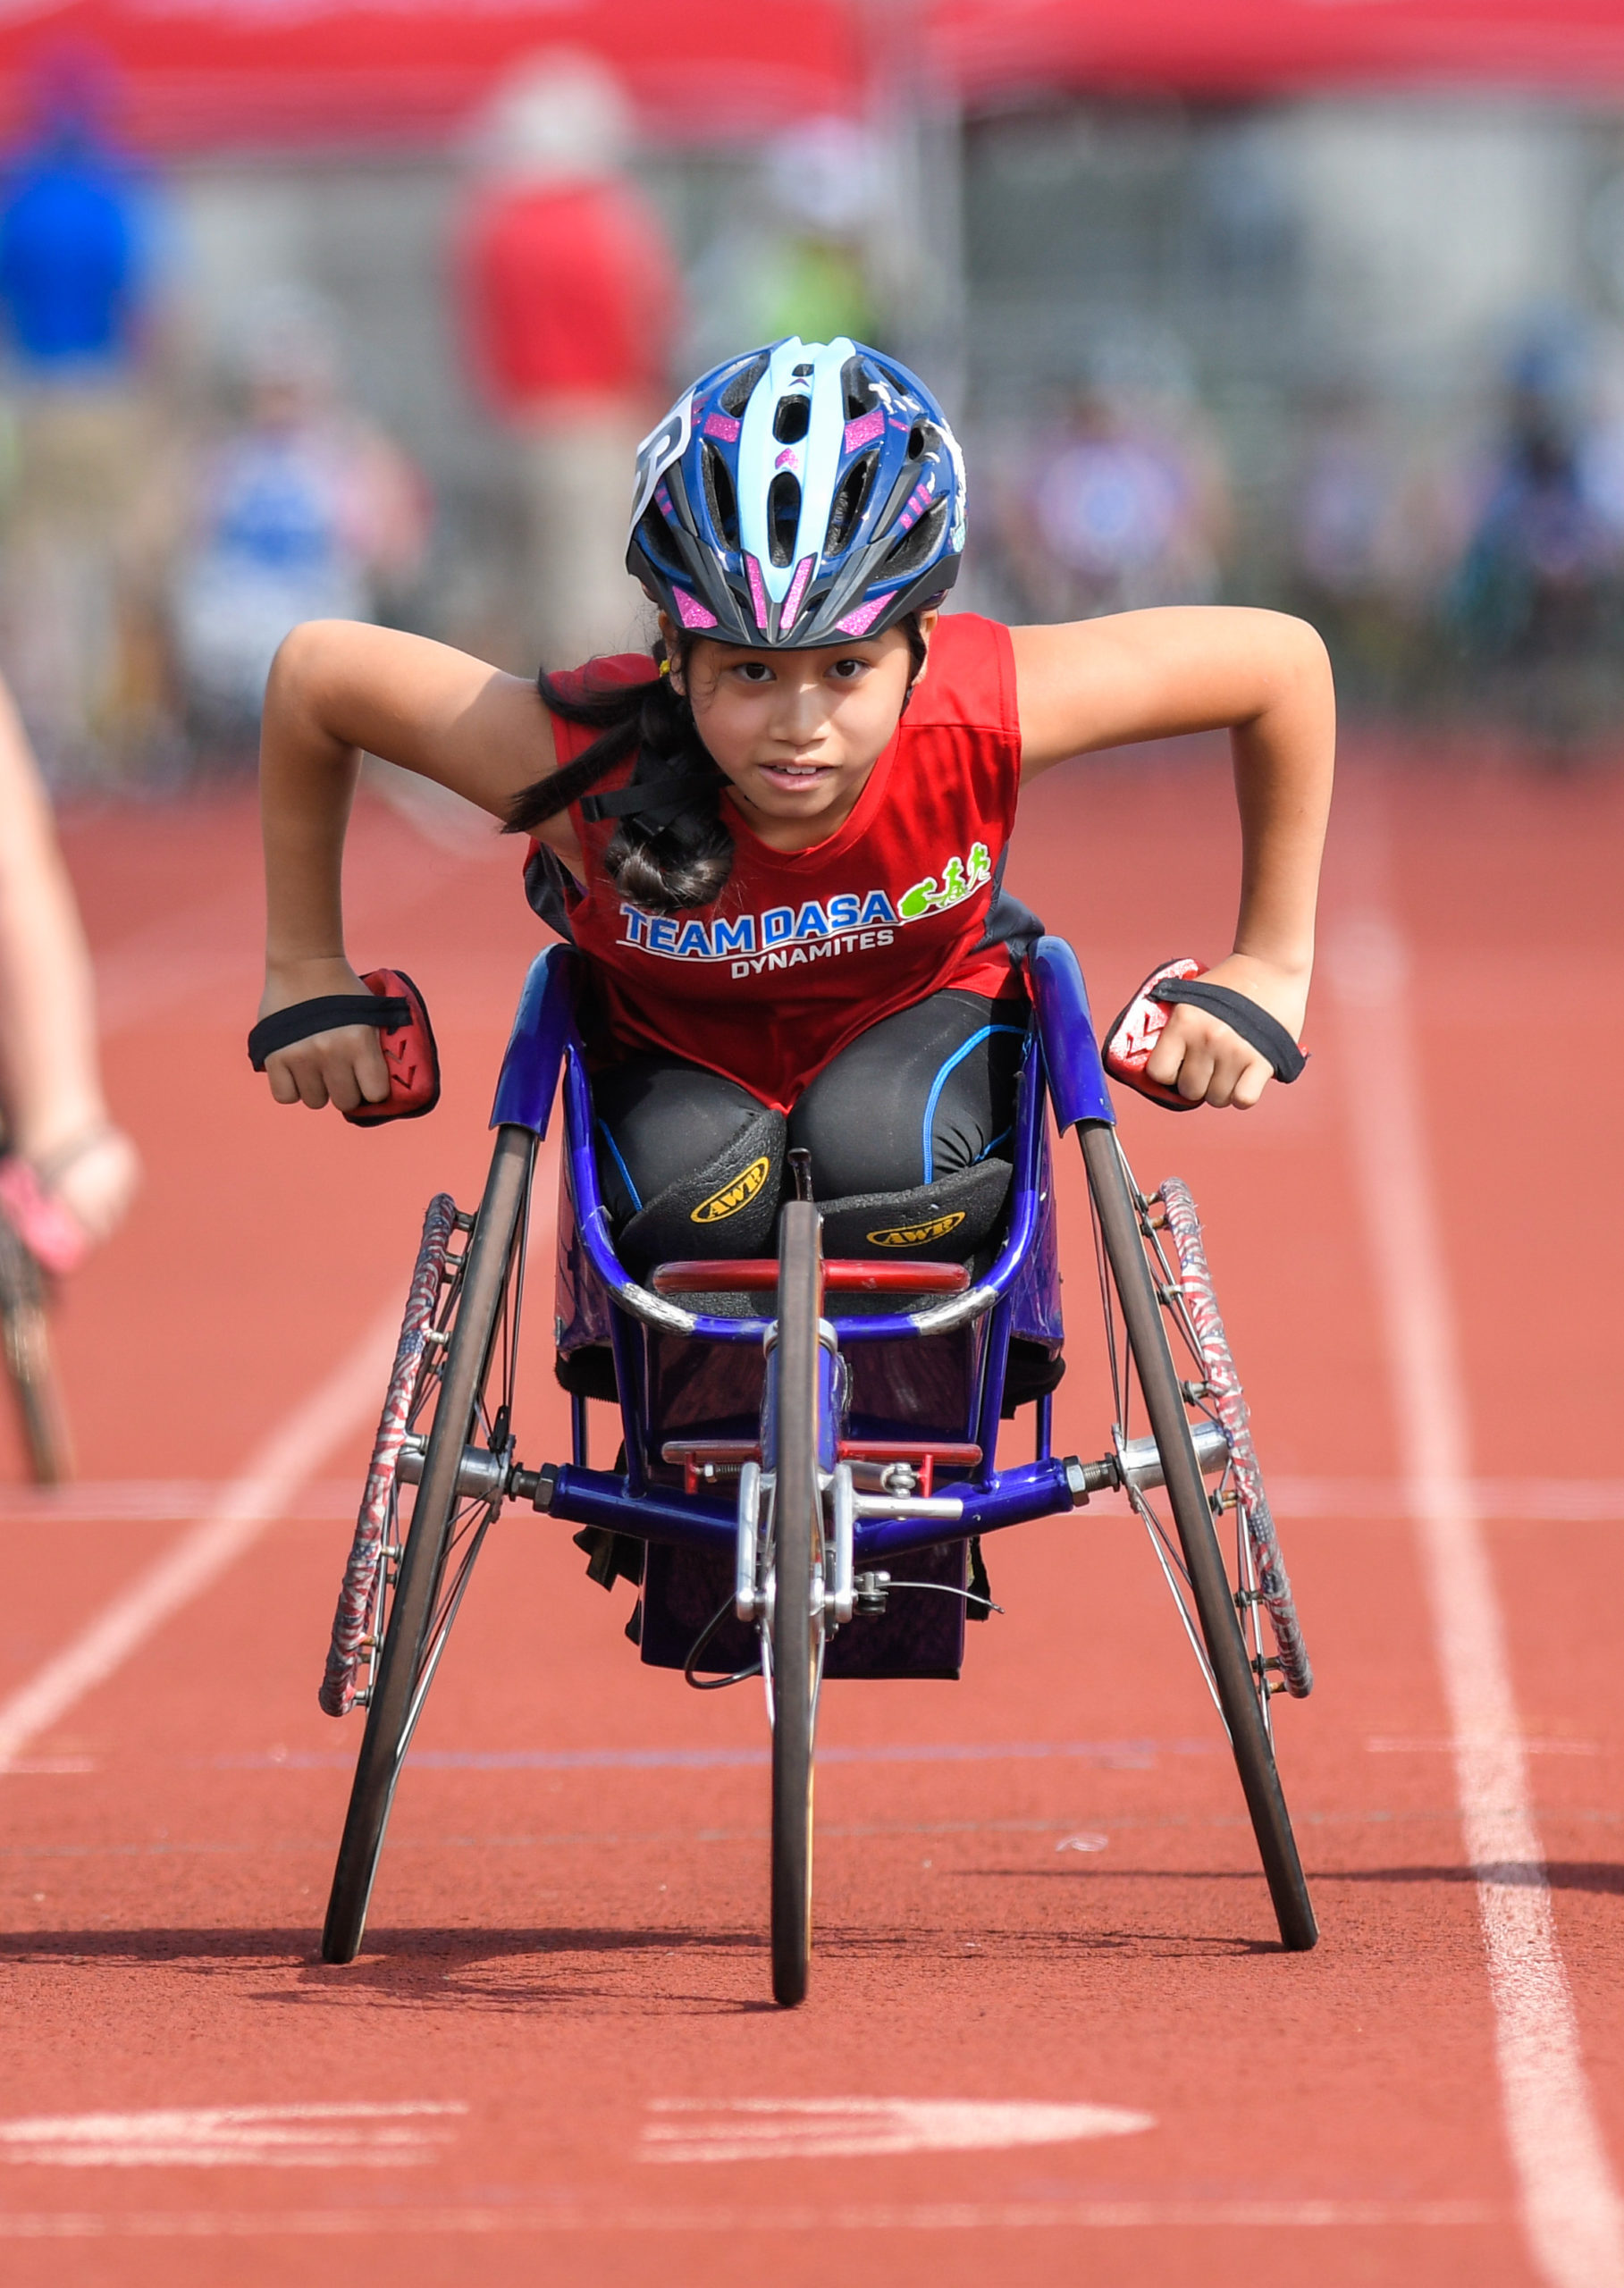 Fourth day of ASUSA Junior Nationals, track events, Keira Cromwell. (Photo by Reed Hoffmann on 7/18/19) Shot with a NIKON D500, Aperture Priority, SUNNY white balance, ISO 200, 1/1600 at f/4 in multi-segment metering, 0.0 EV, Nikkor VR 300mm f/2.8G IF-ED lens at 300mm, focus mode of AF-C and Picture Control set to STANDARD. Photo copyright Reed Hoffmann.